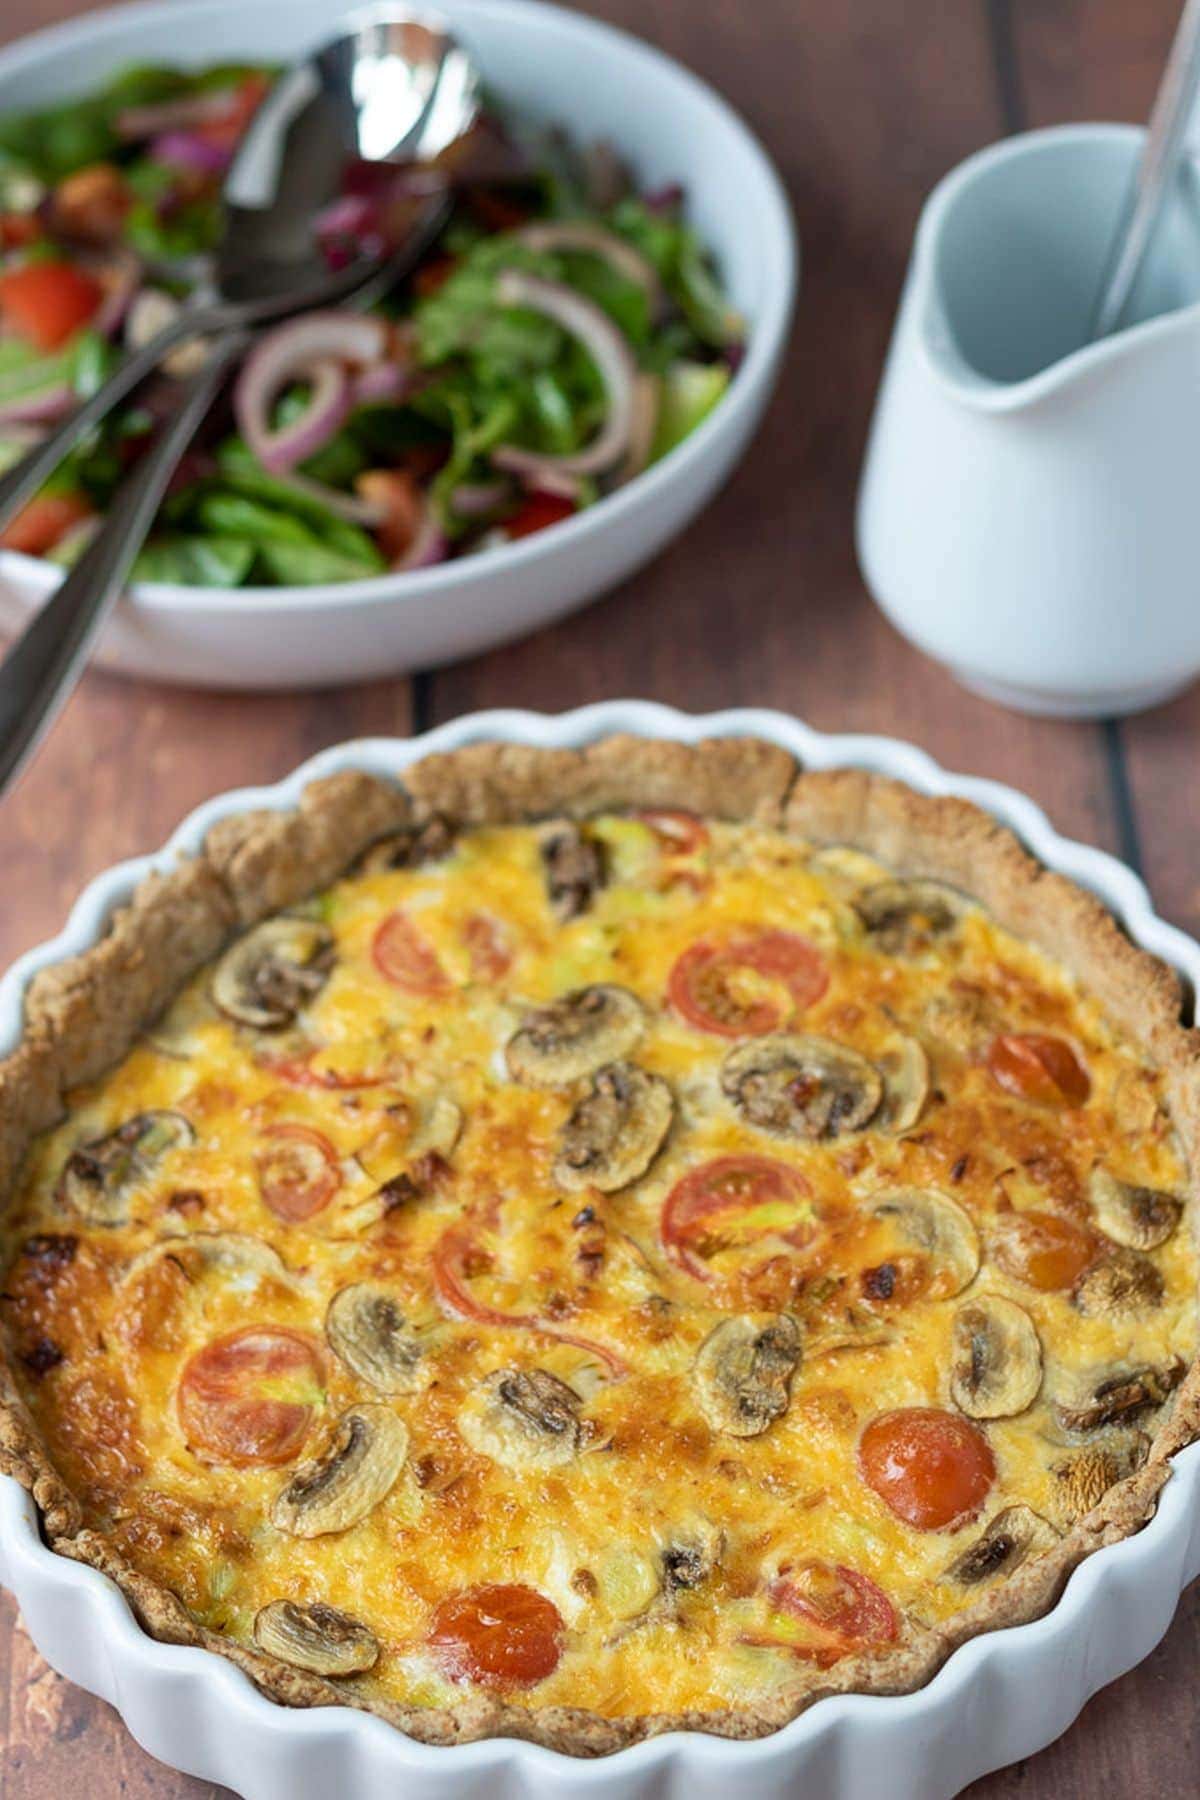 Tomato leek and mushroom quiche just taken out of the oven with a bowl of side salad and a jug in the background.